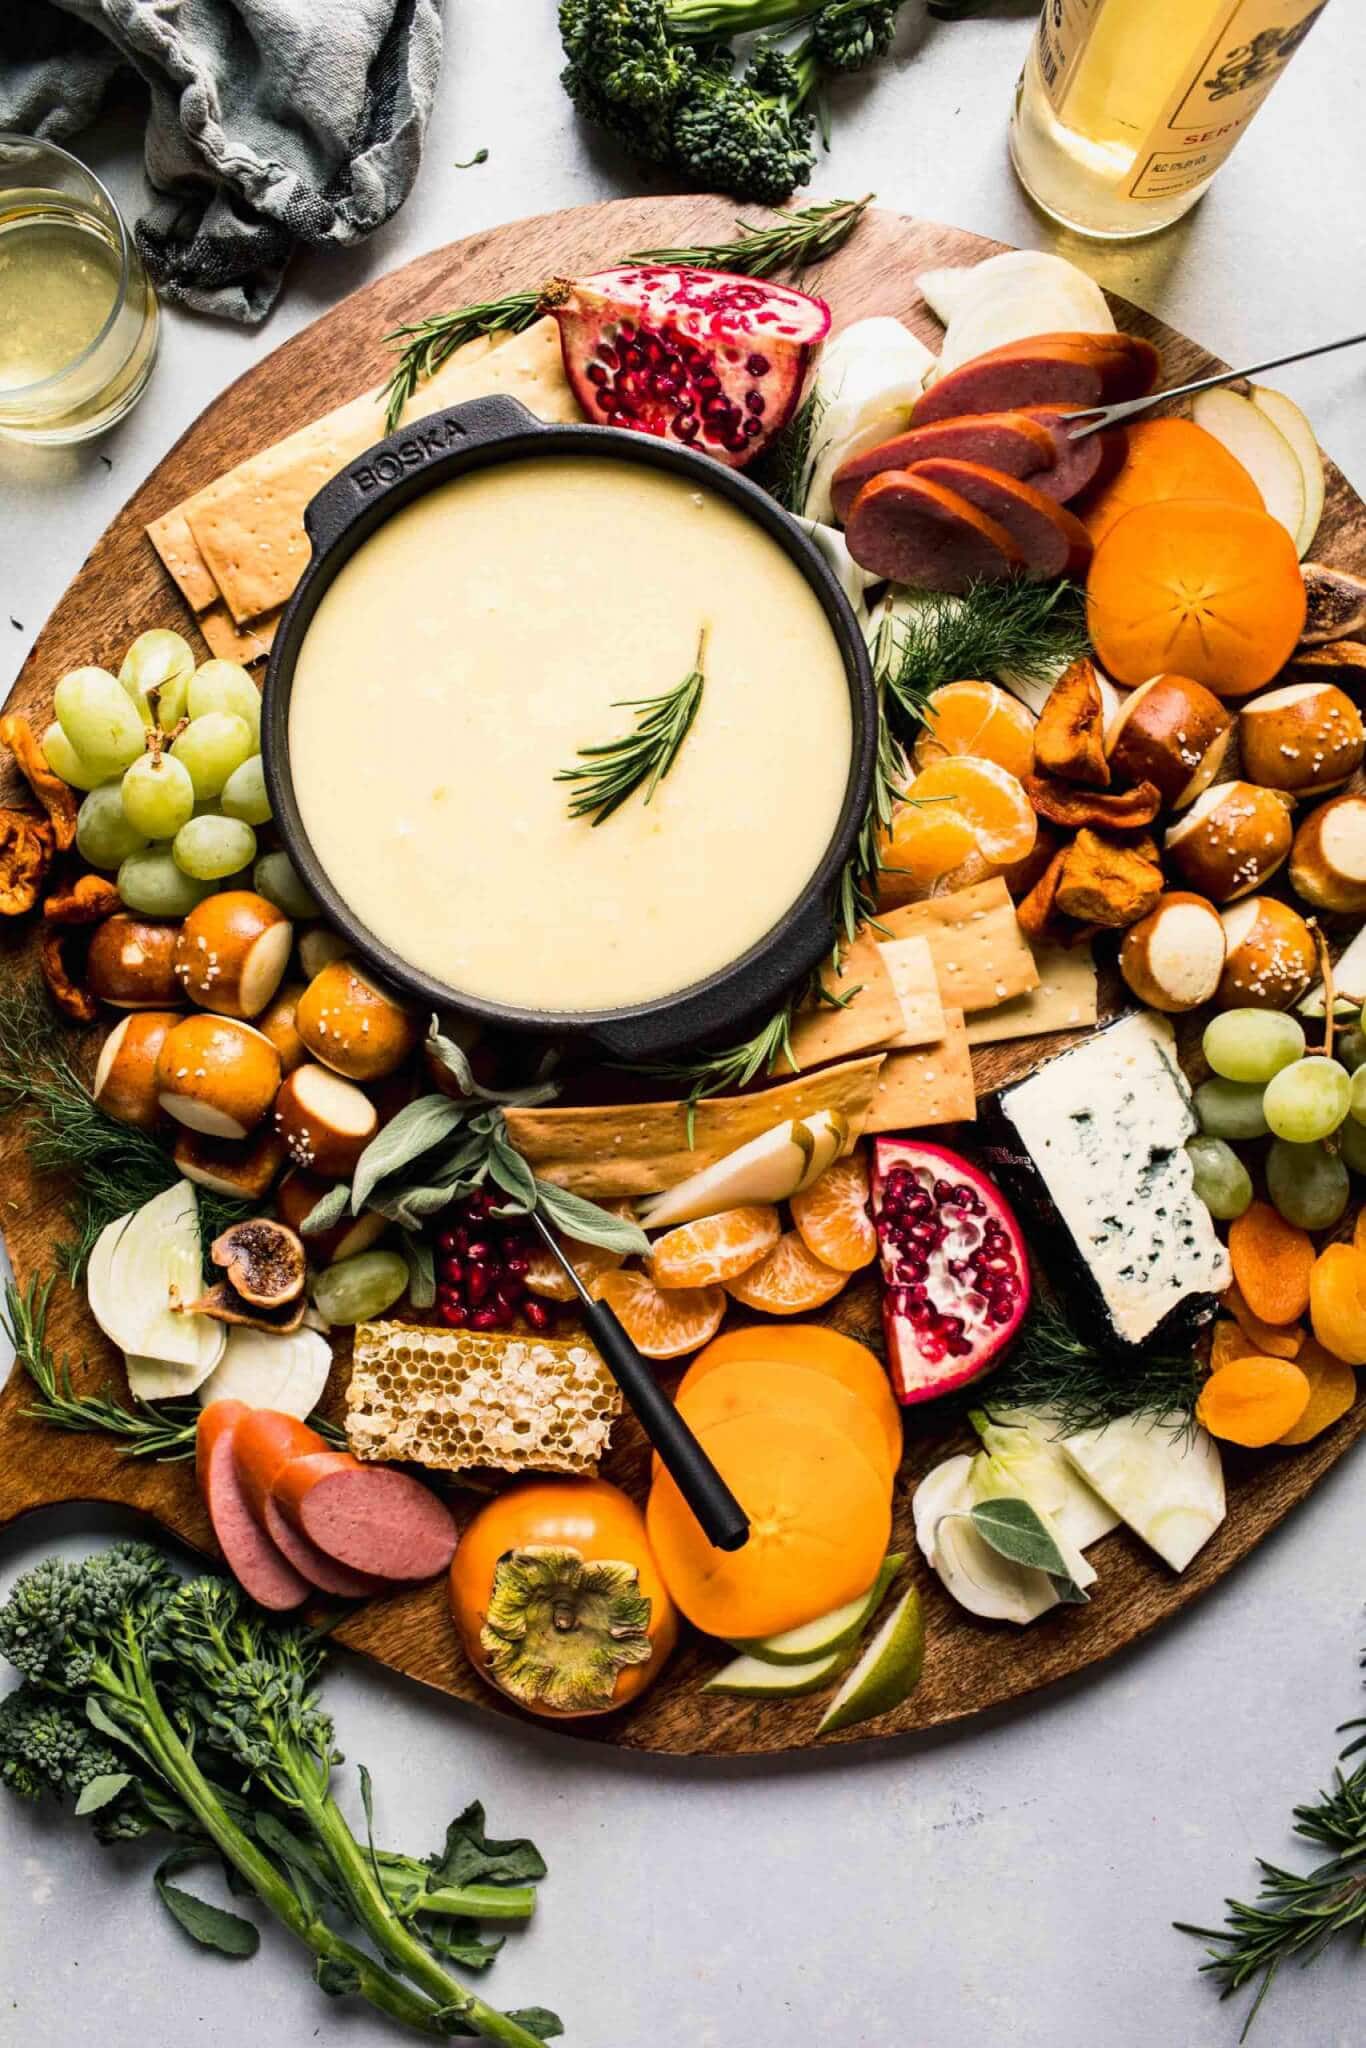 Fondue pot on cheese board surrounded by fruits, crackers and meats. 